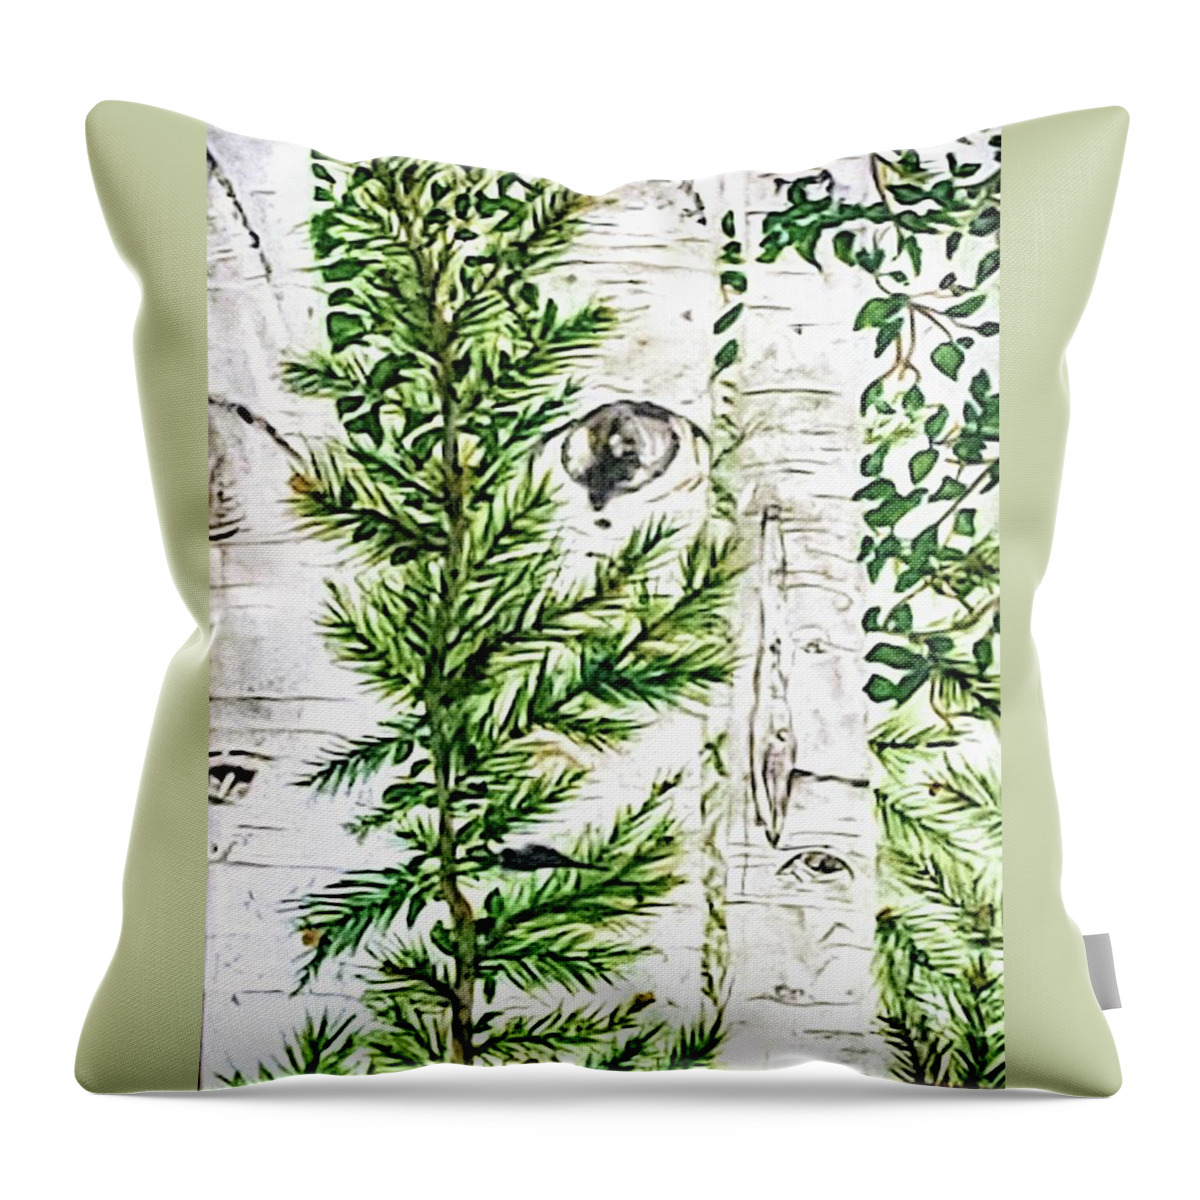 Aspens Pines Trees Aspen Trees. Pine Trees Throw Pillow featuring the painting Nature's Spy by Teri Merrill